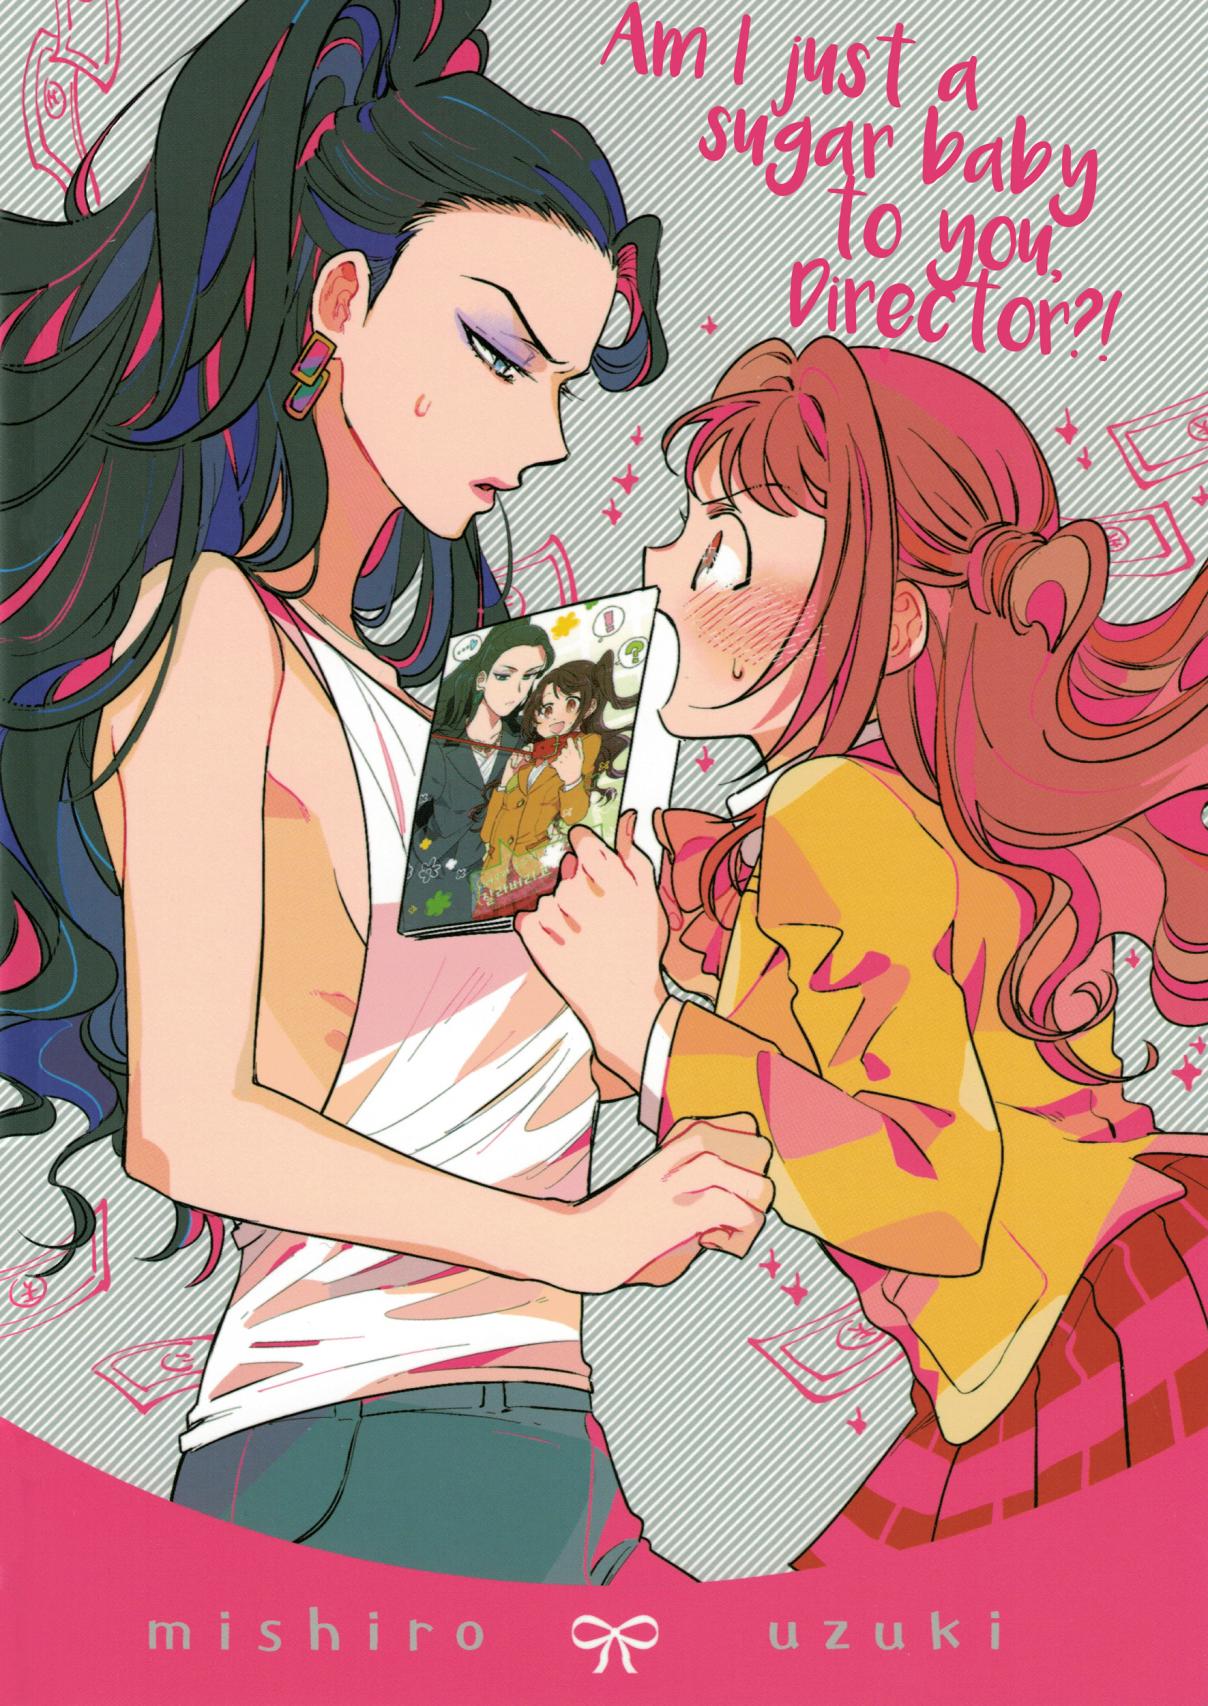 THE iDOLM@STER Am I Just a Sugar Baby to You, Director?! (Doujinshi) Oneshot